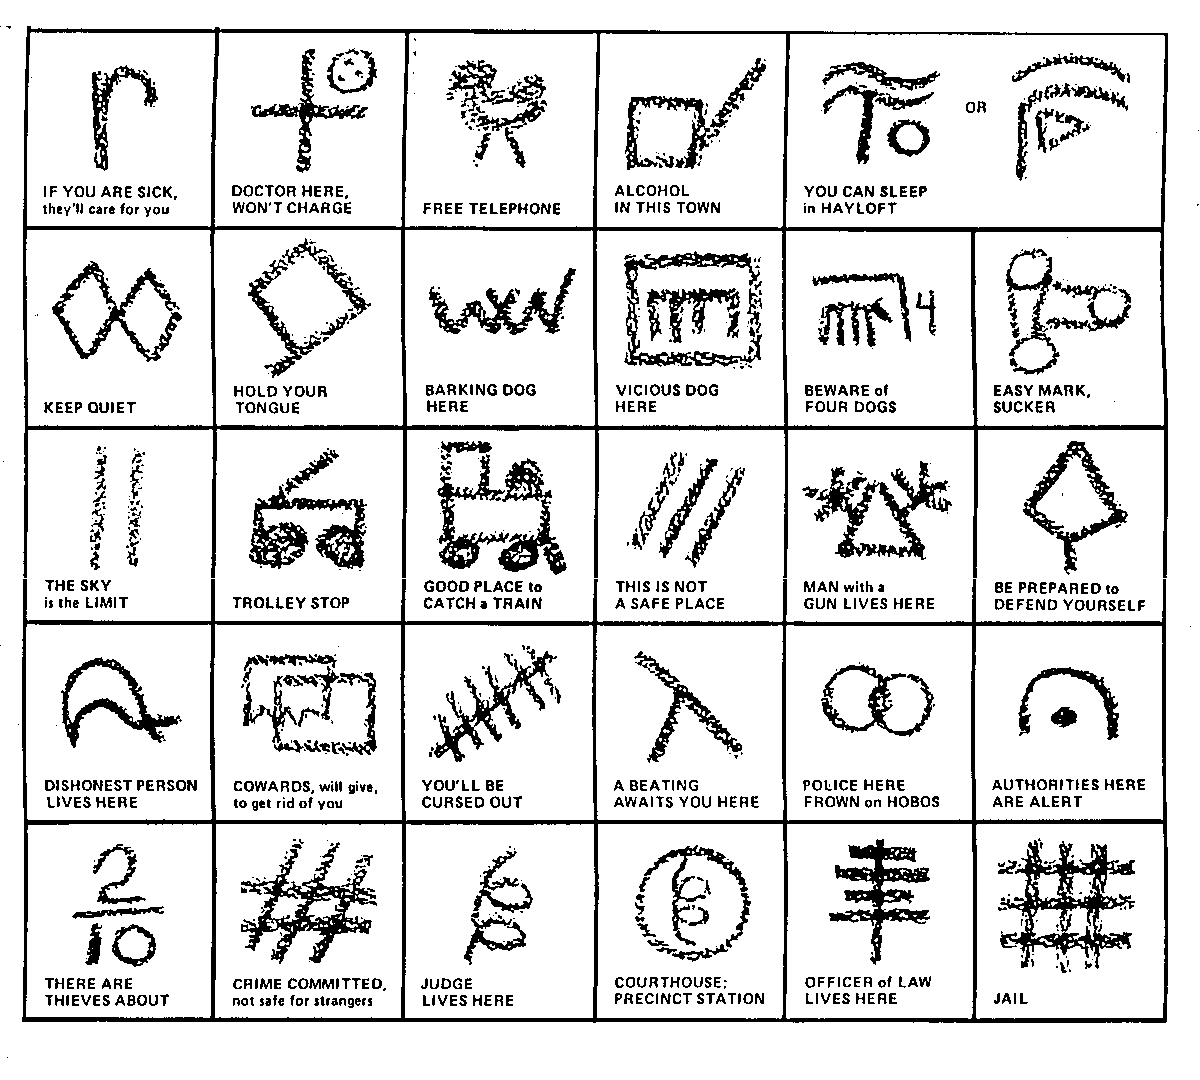 hobo signs is a system of symbols or a code developed by hobos medium